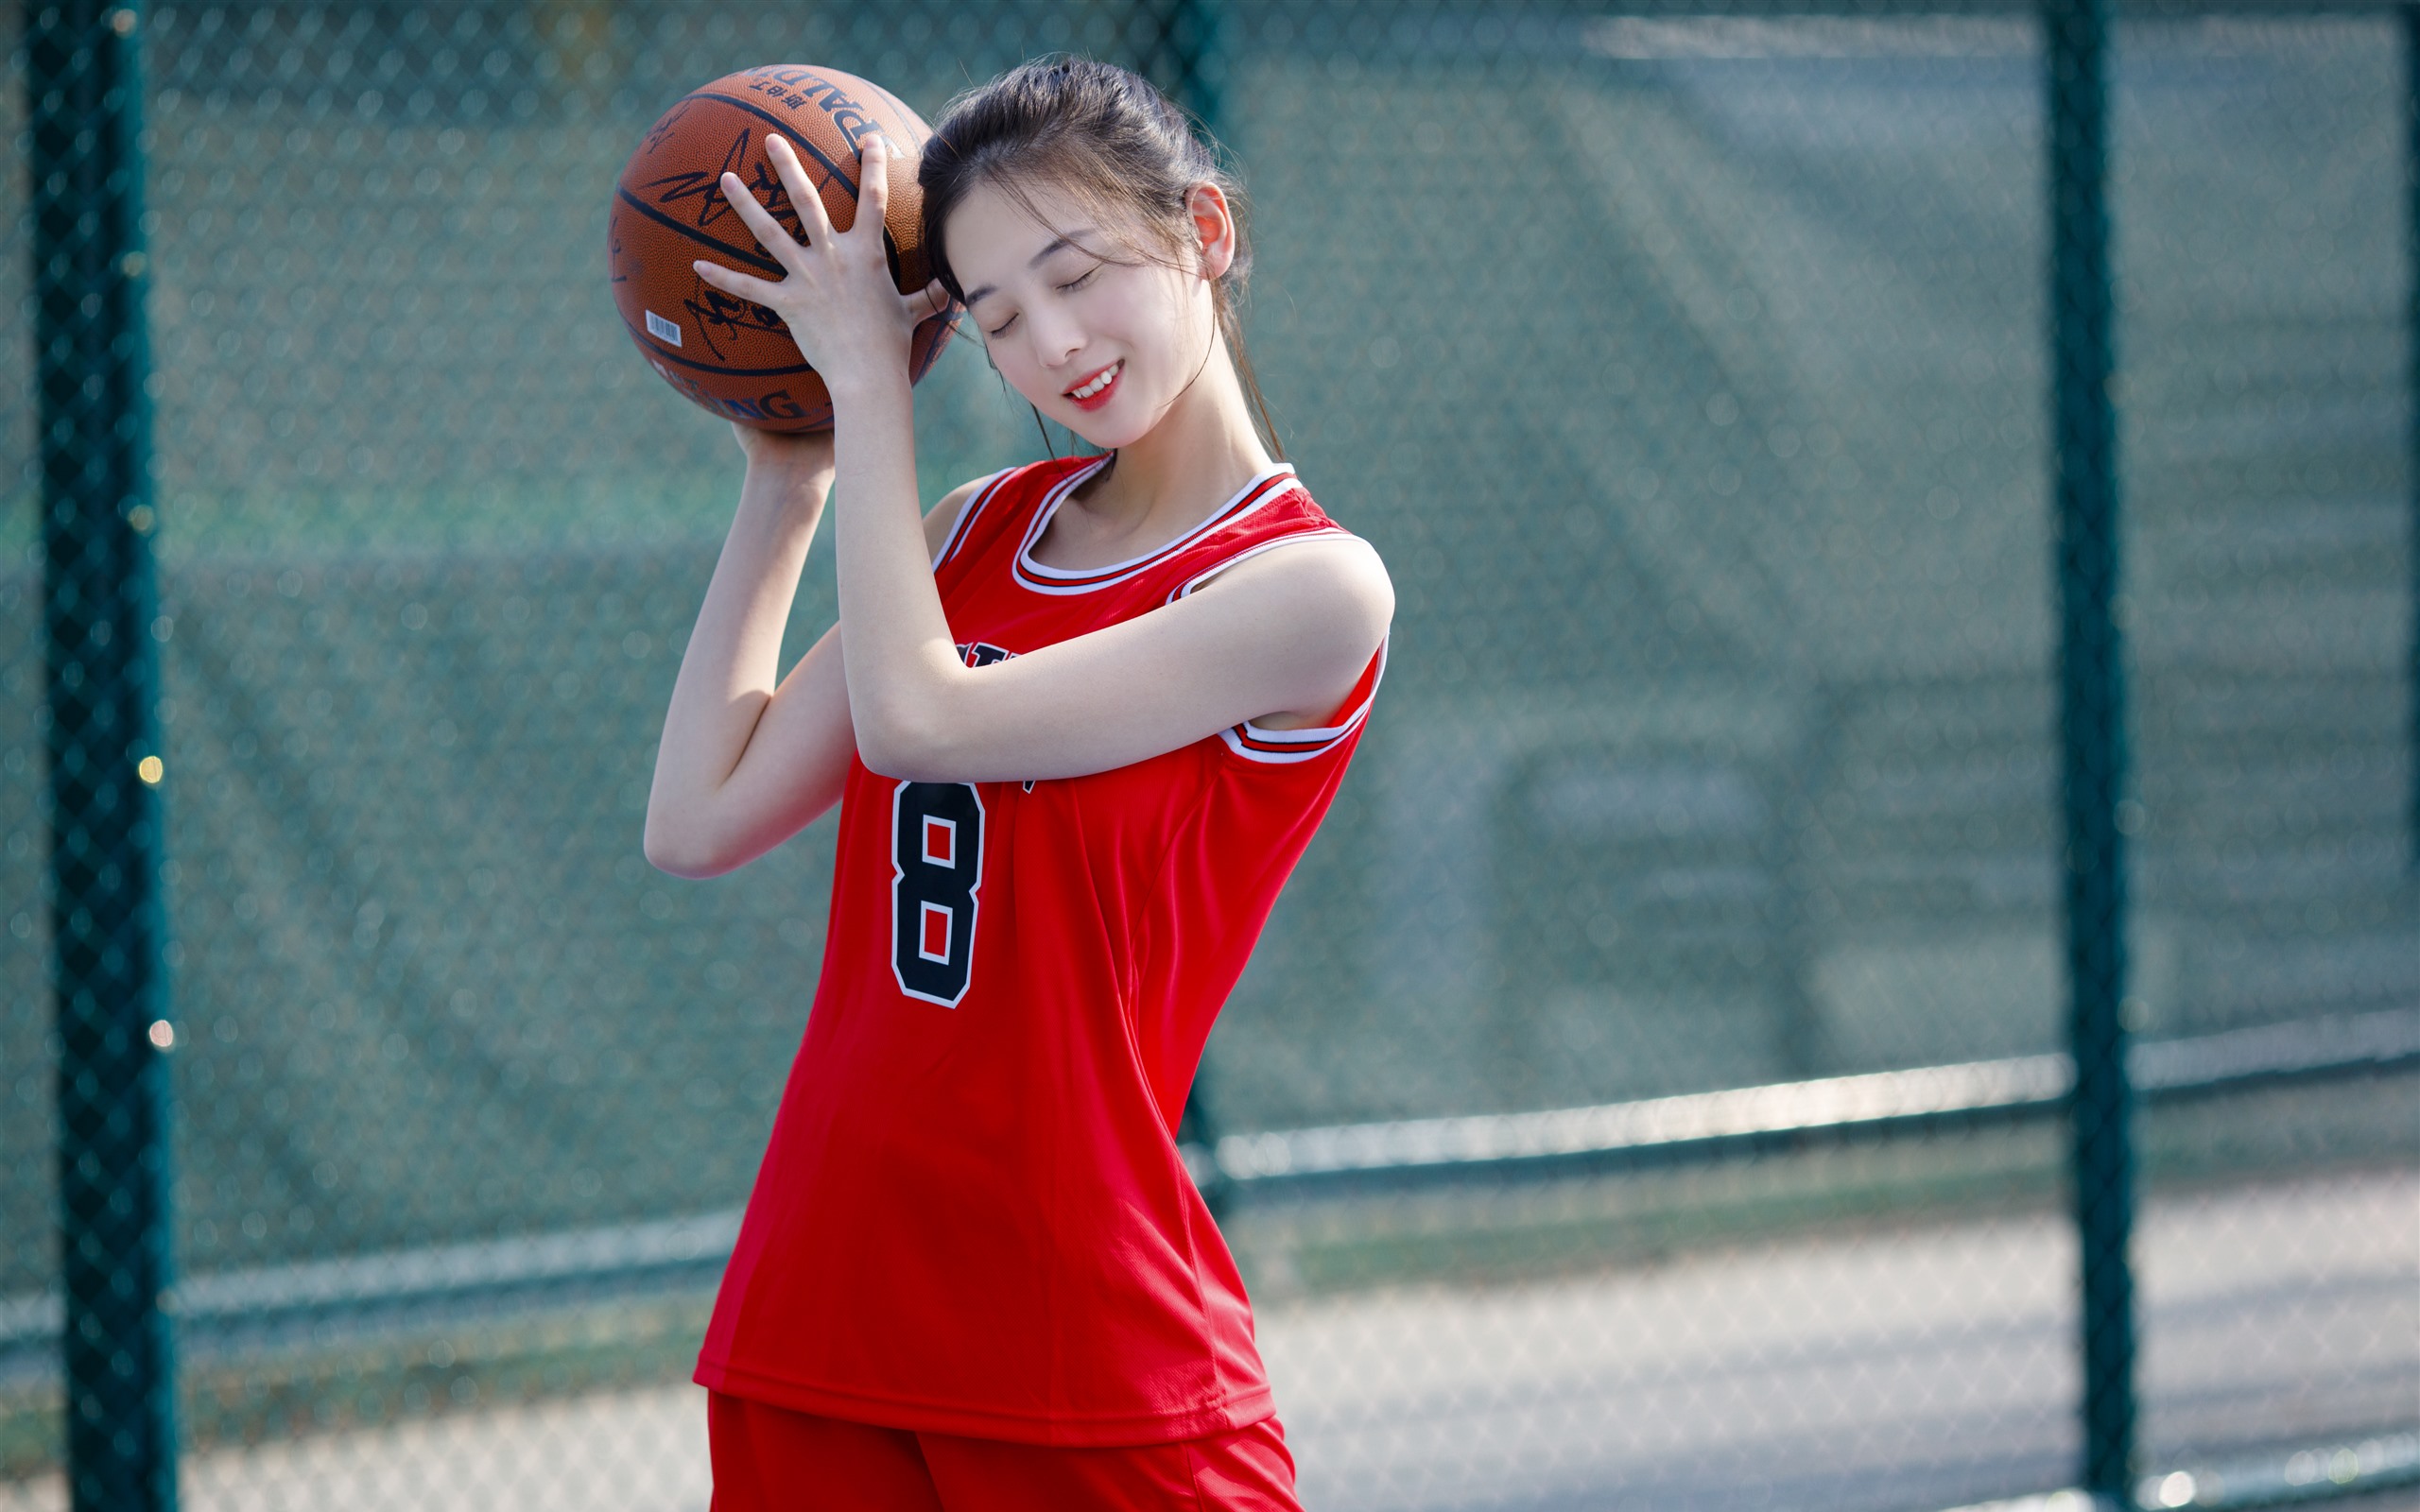 Wallpapers Lovely young girl, basketball, sport 5120x2880 UHD 5K Picture, I...